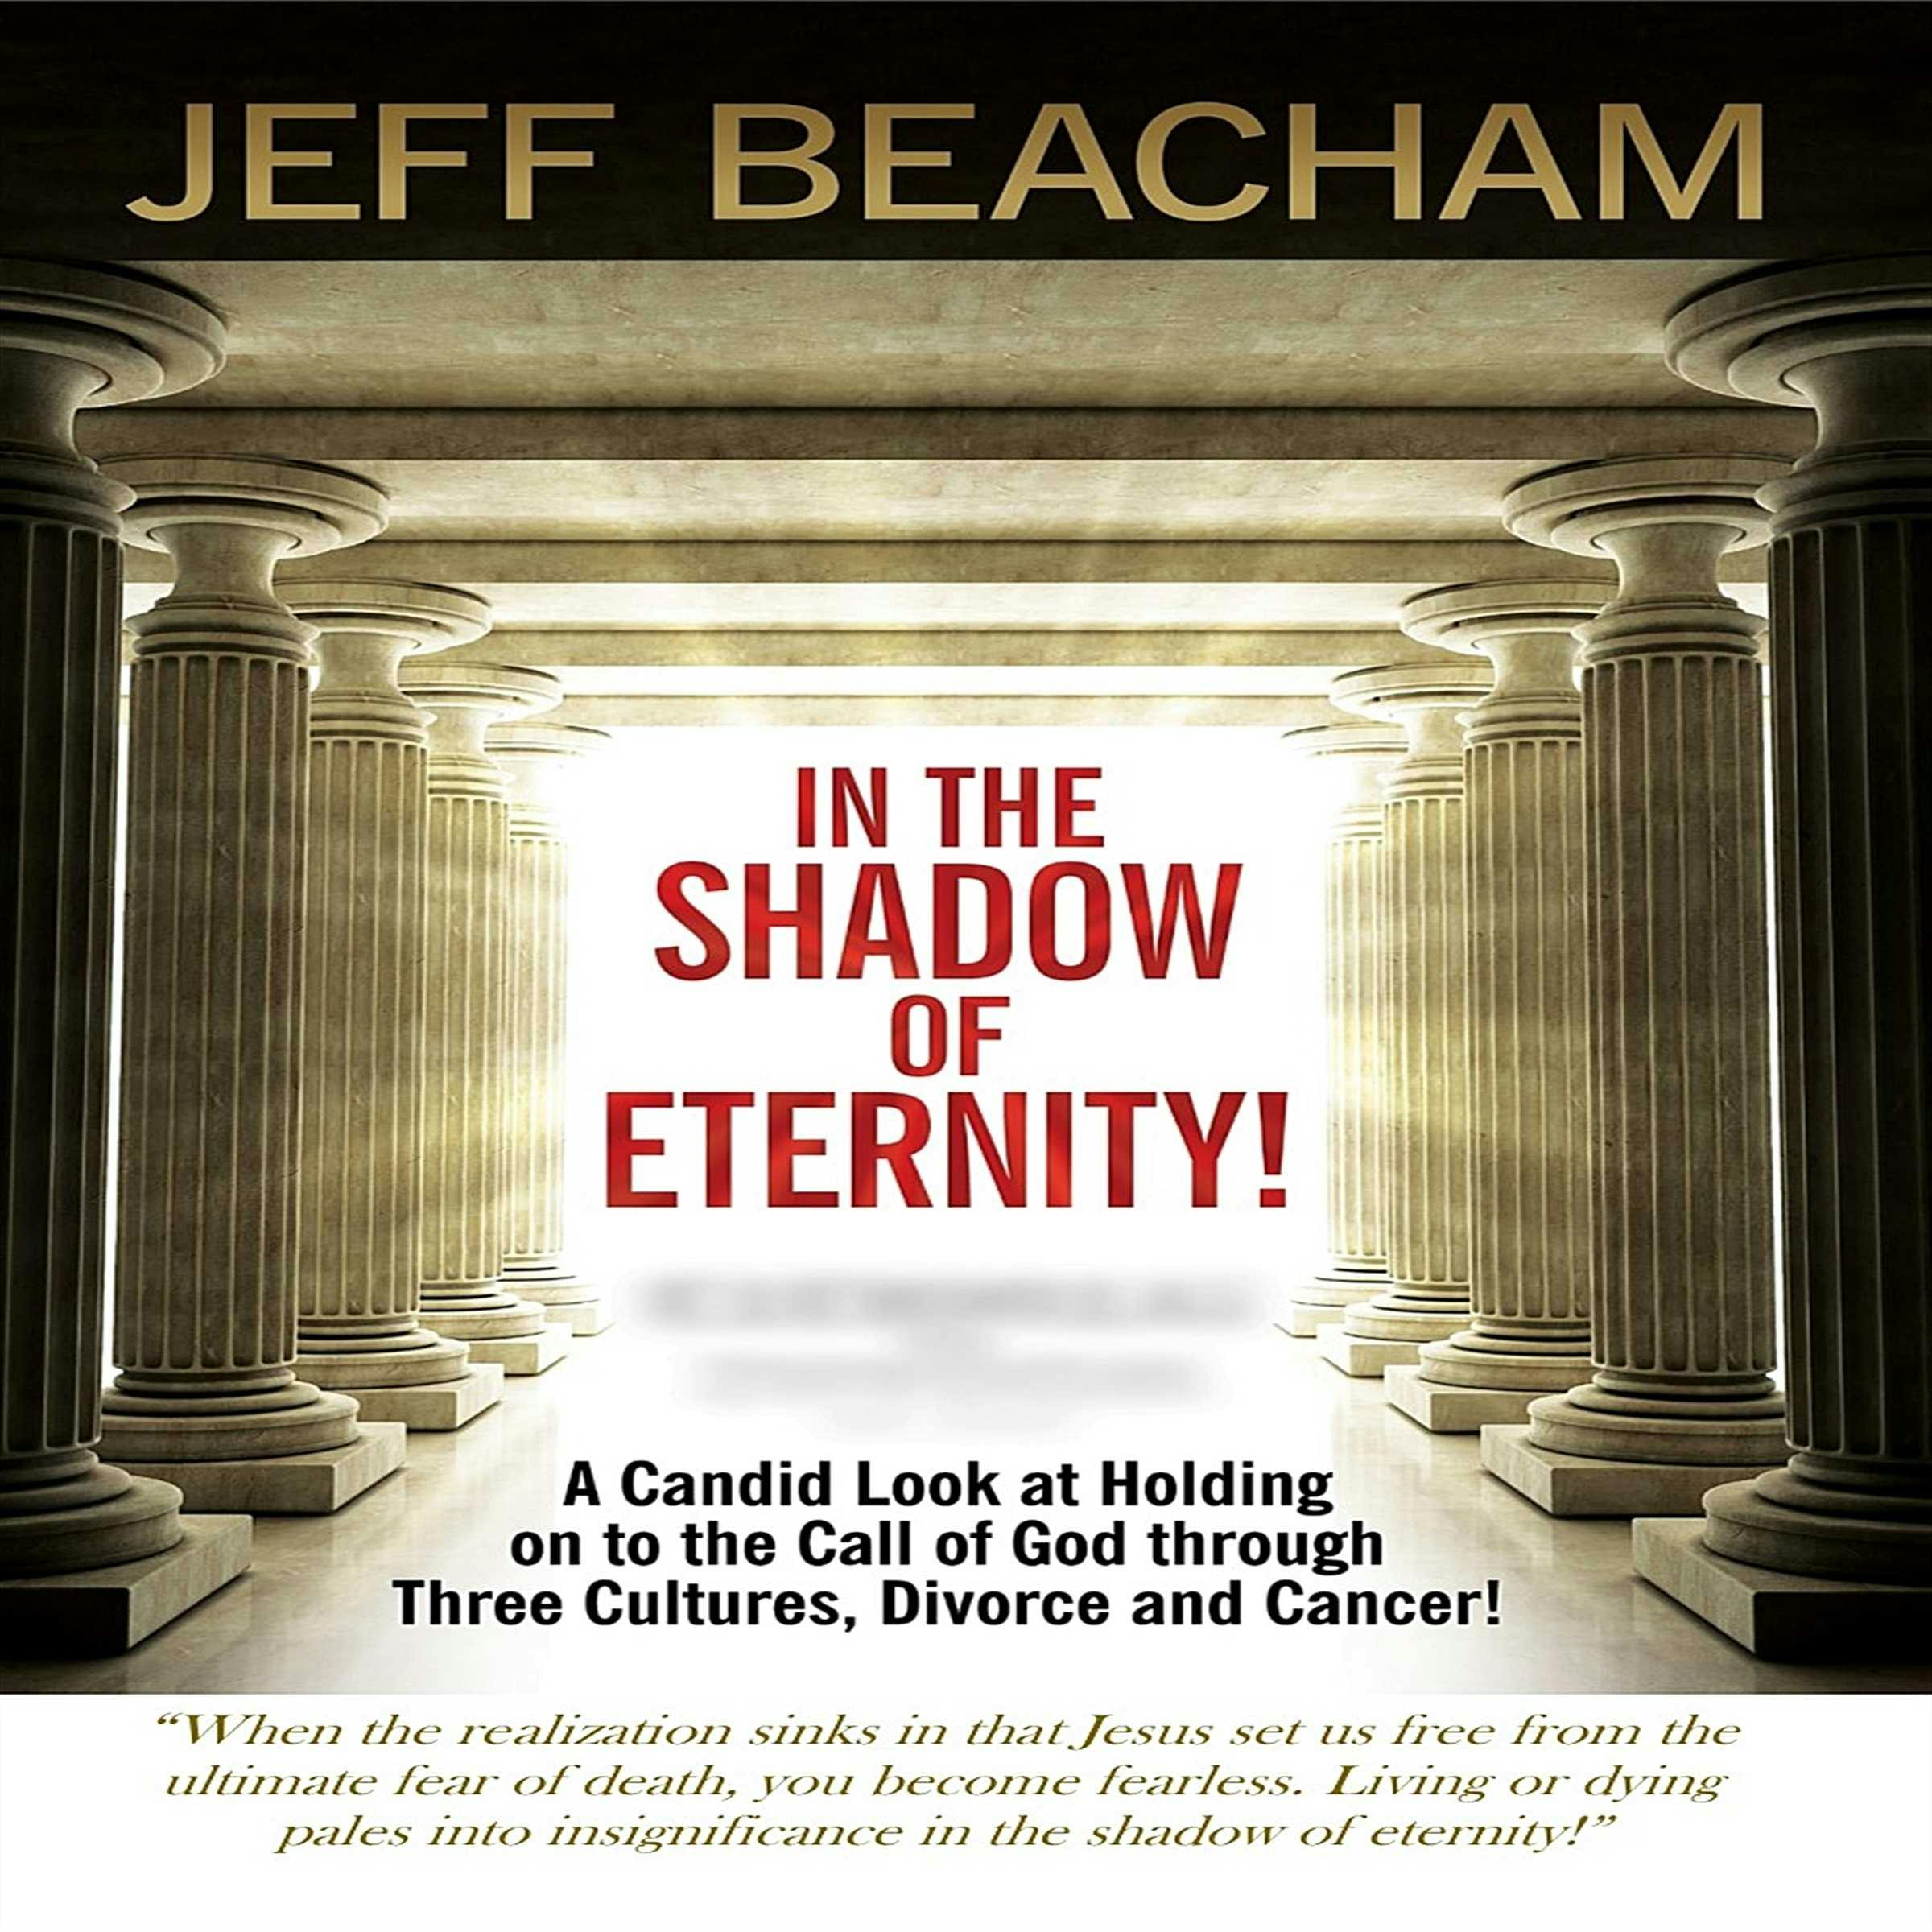 In the Shadow of Eternity: A Candid Look at Holding on to the Call of God through Three Cultures, Divorce and Cancer! - Jeff Beacham